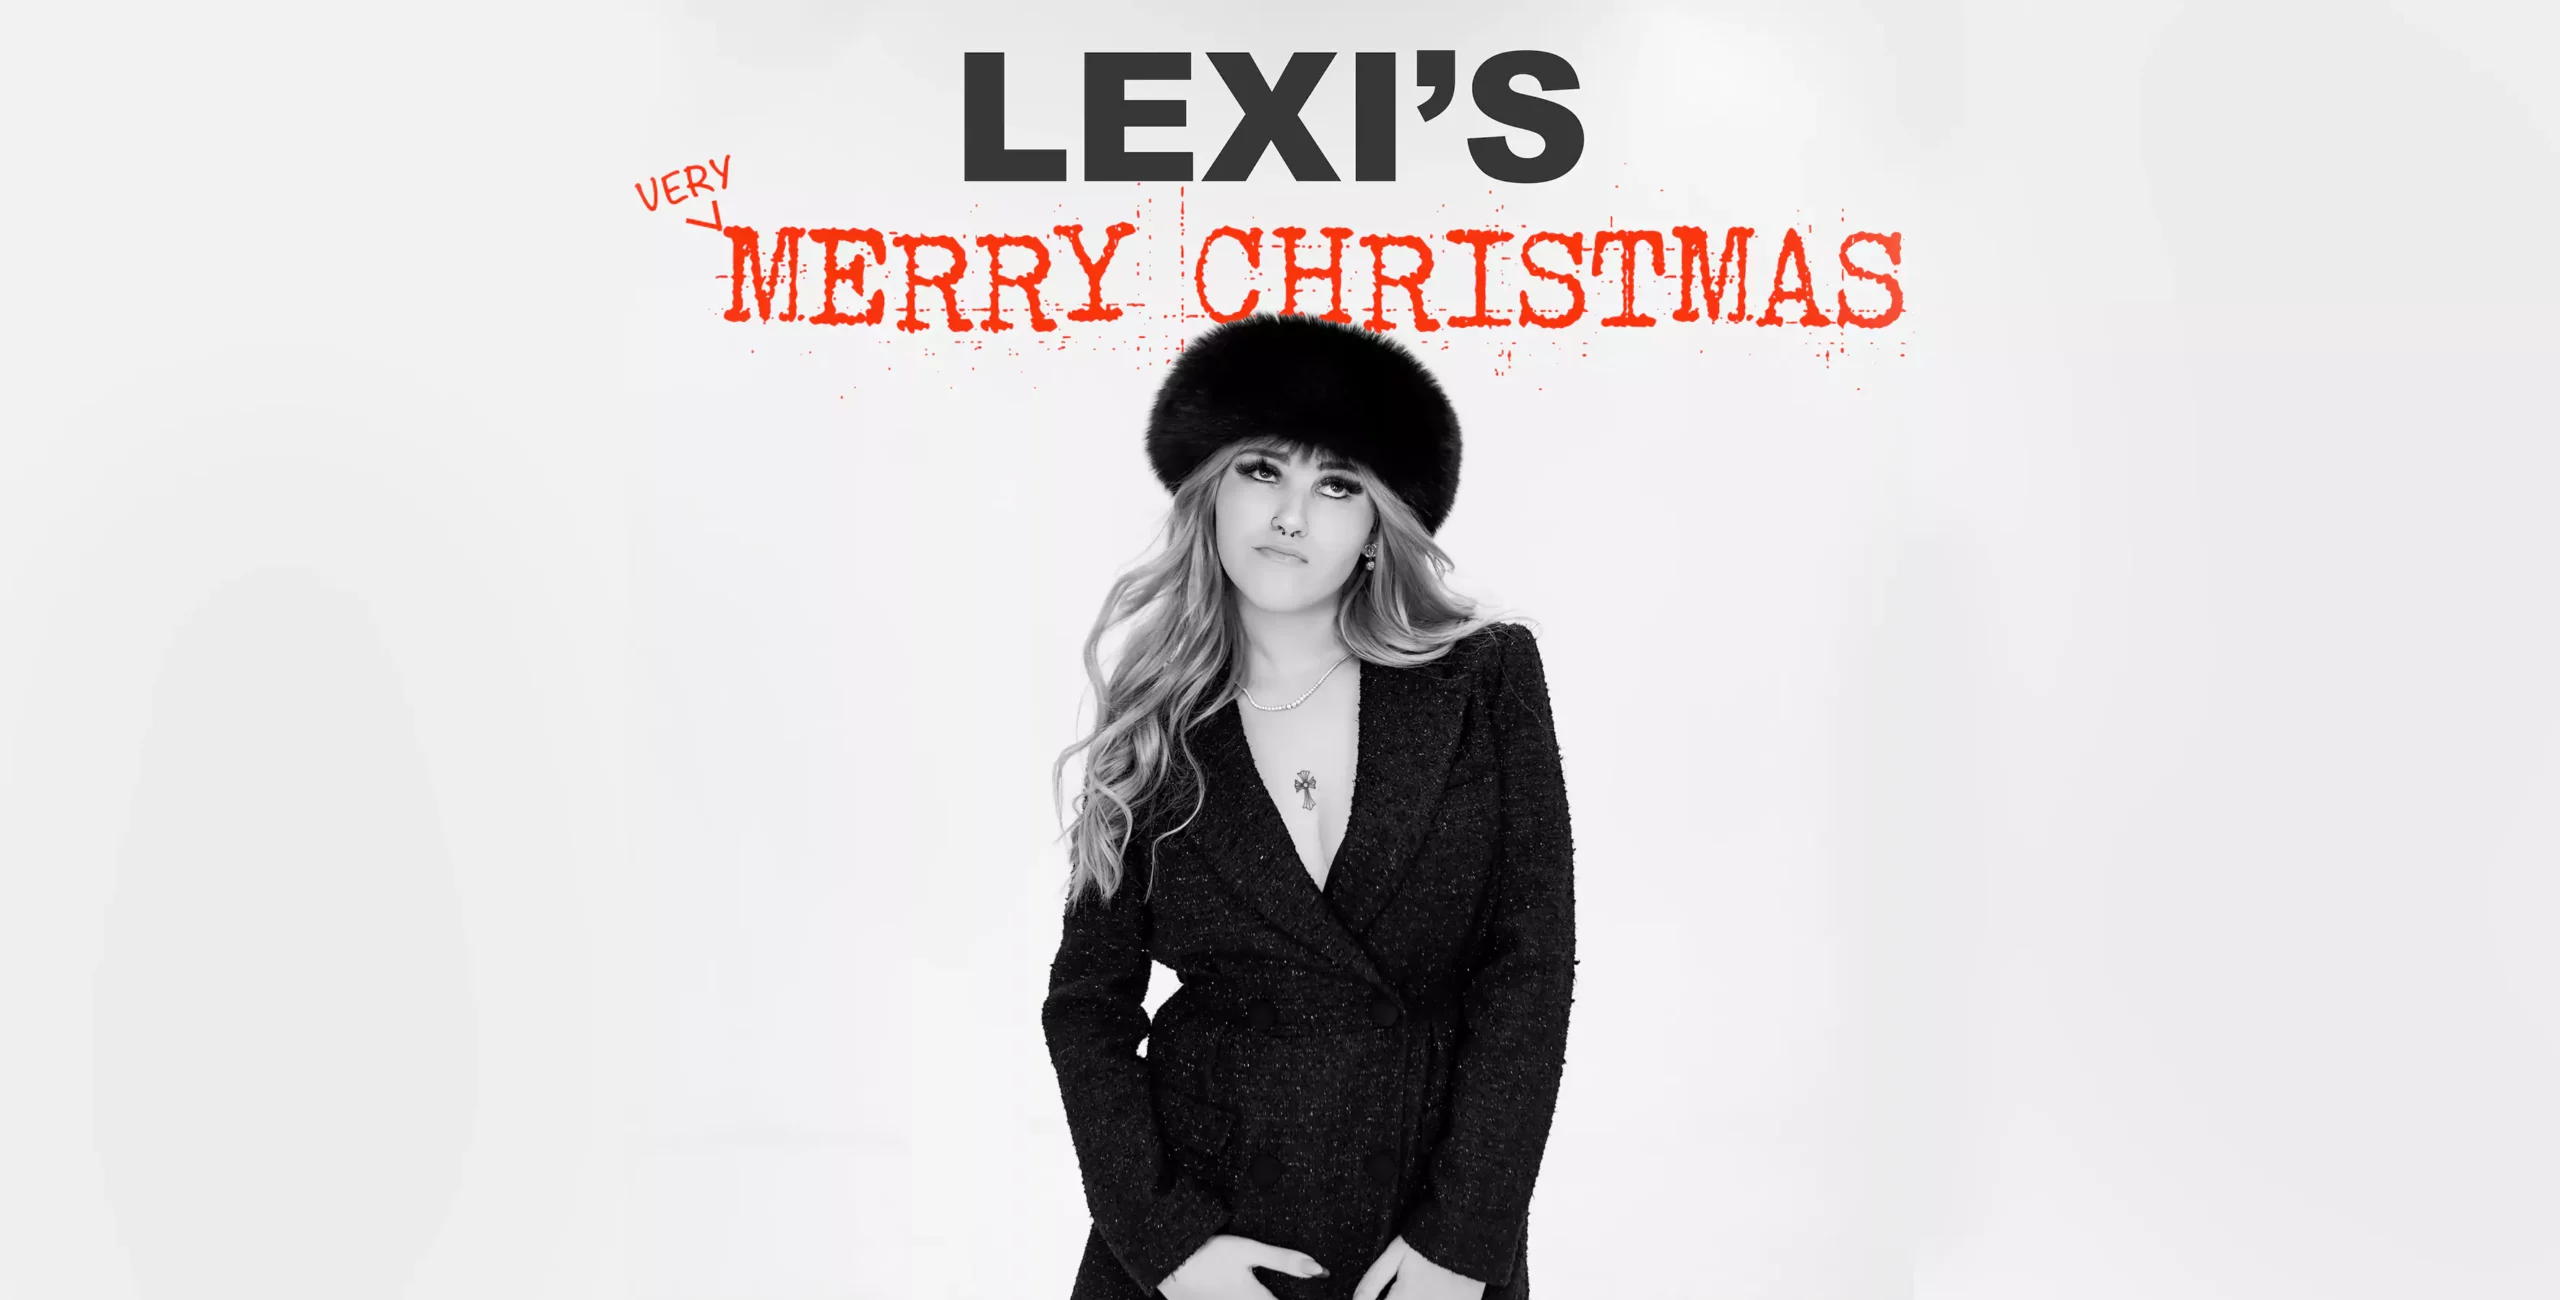 TIS THE SEASON TO LISTEN TO NEW HOLIDAY MUSIC FROM NEW ARTIST LEXI